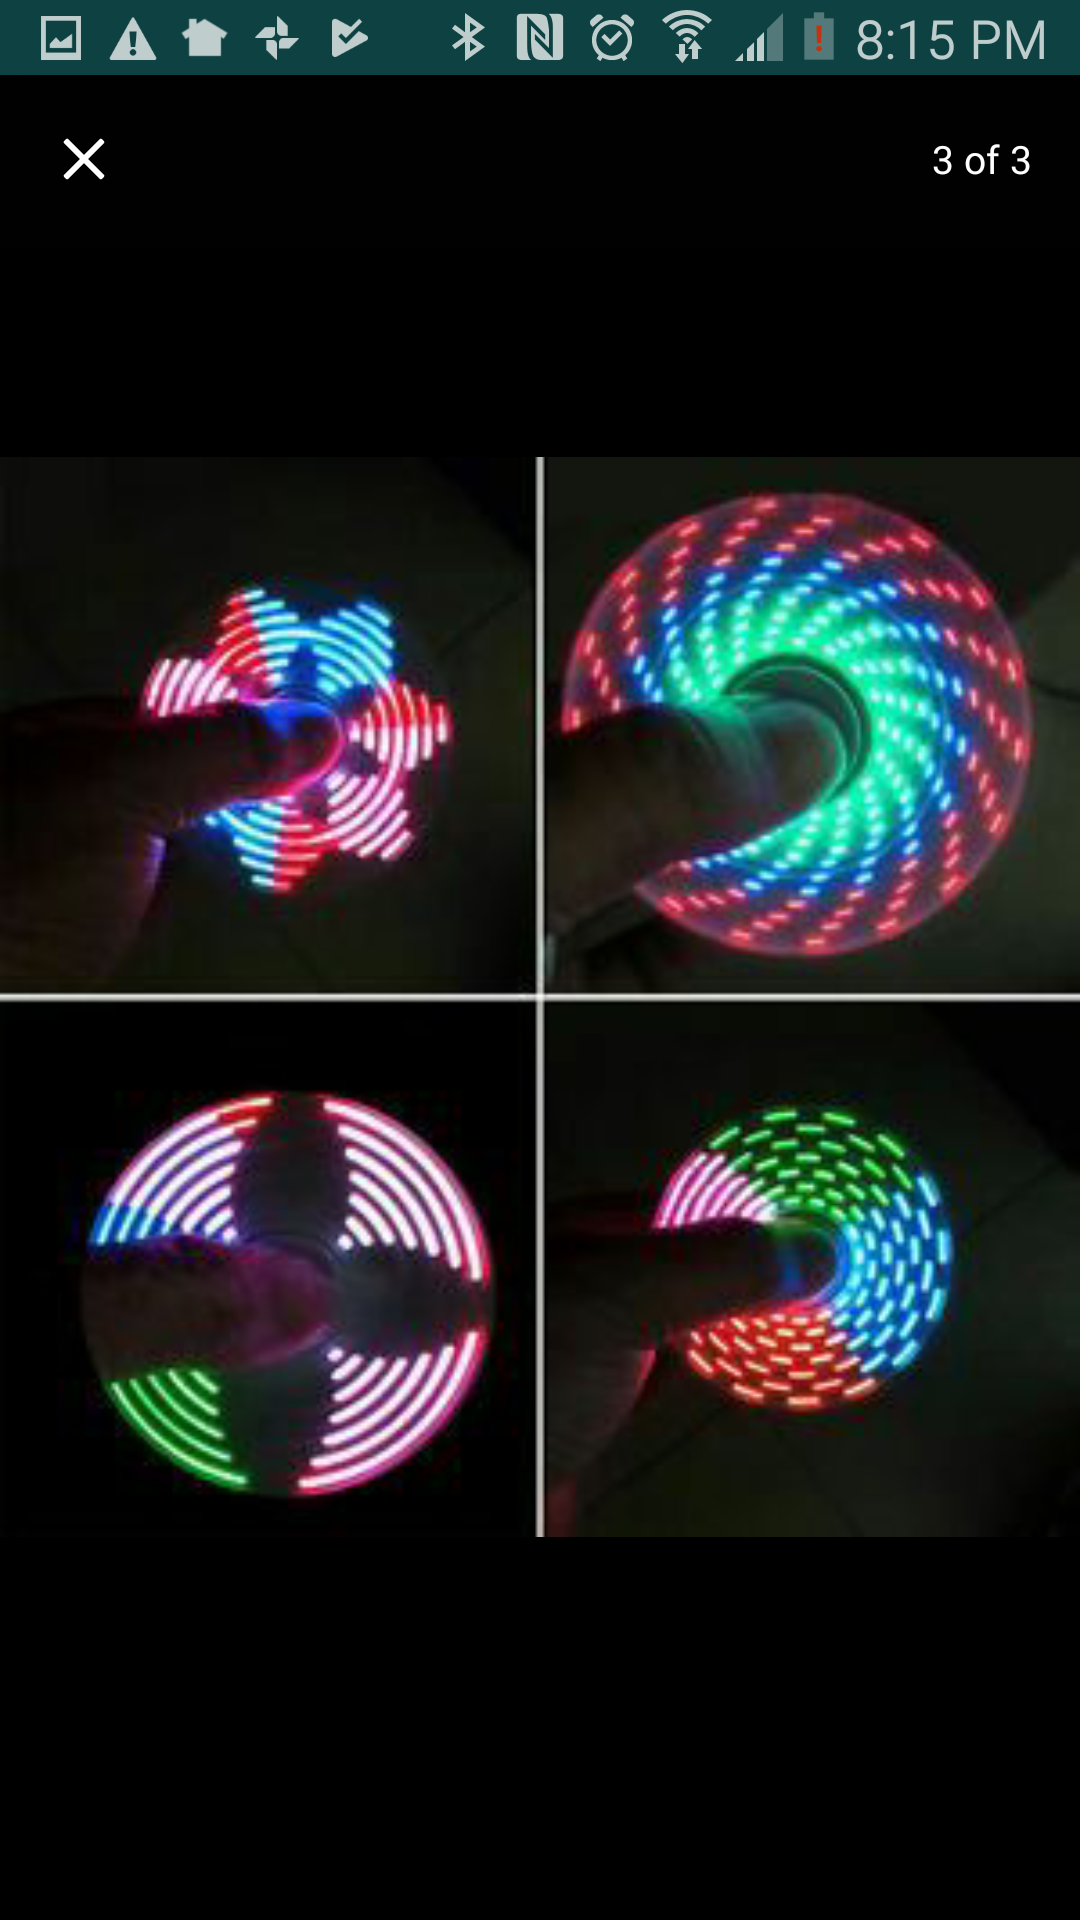 LED fidget spinner - Party favors - $8 each or $6 for more than 4